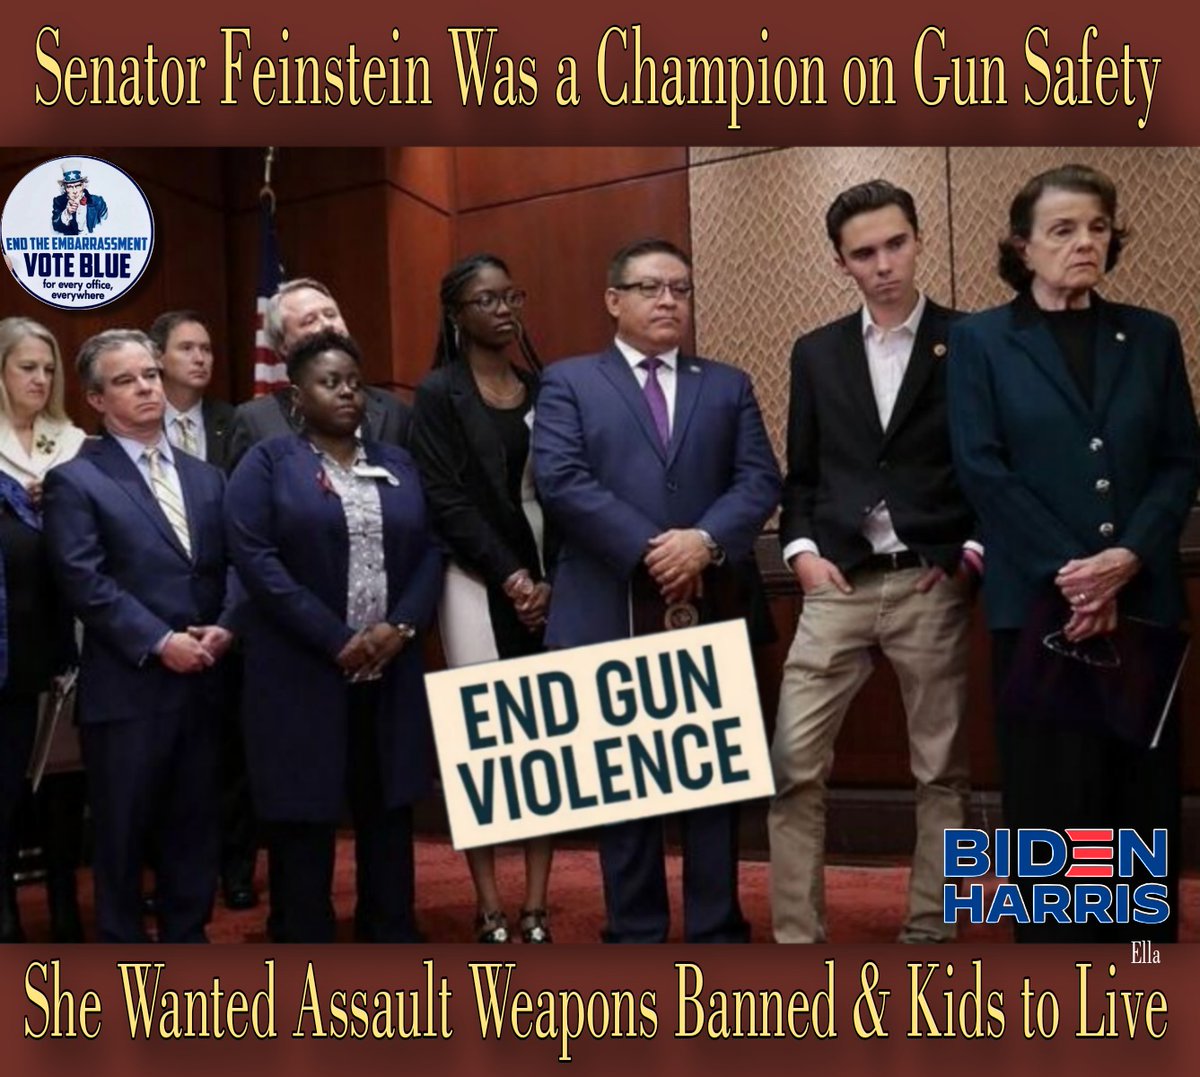 @tweetMalena #Senator #DianneFeinstein was a true champion against the proliferation of #guns by the #FascistGOP! She wrote & promoted the 1st #AssaultWeaponsBan & tried so hard to get it passed again after the #SandyHookMassacre. A strong #woman she will be missed #VoteBlue2024 #WomensRights